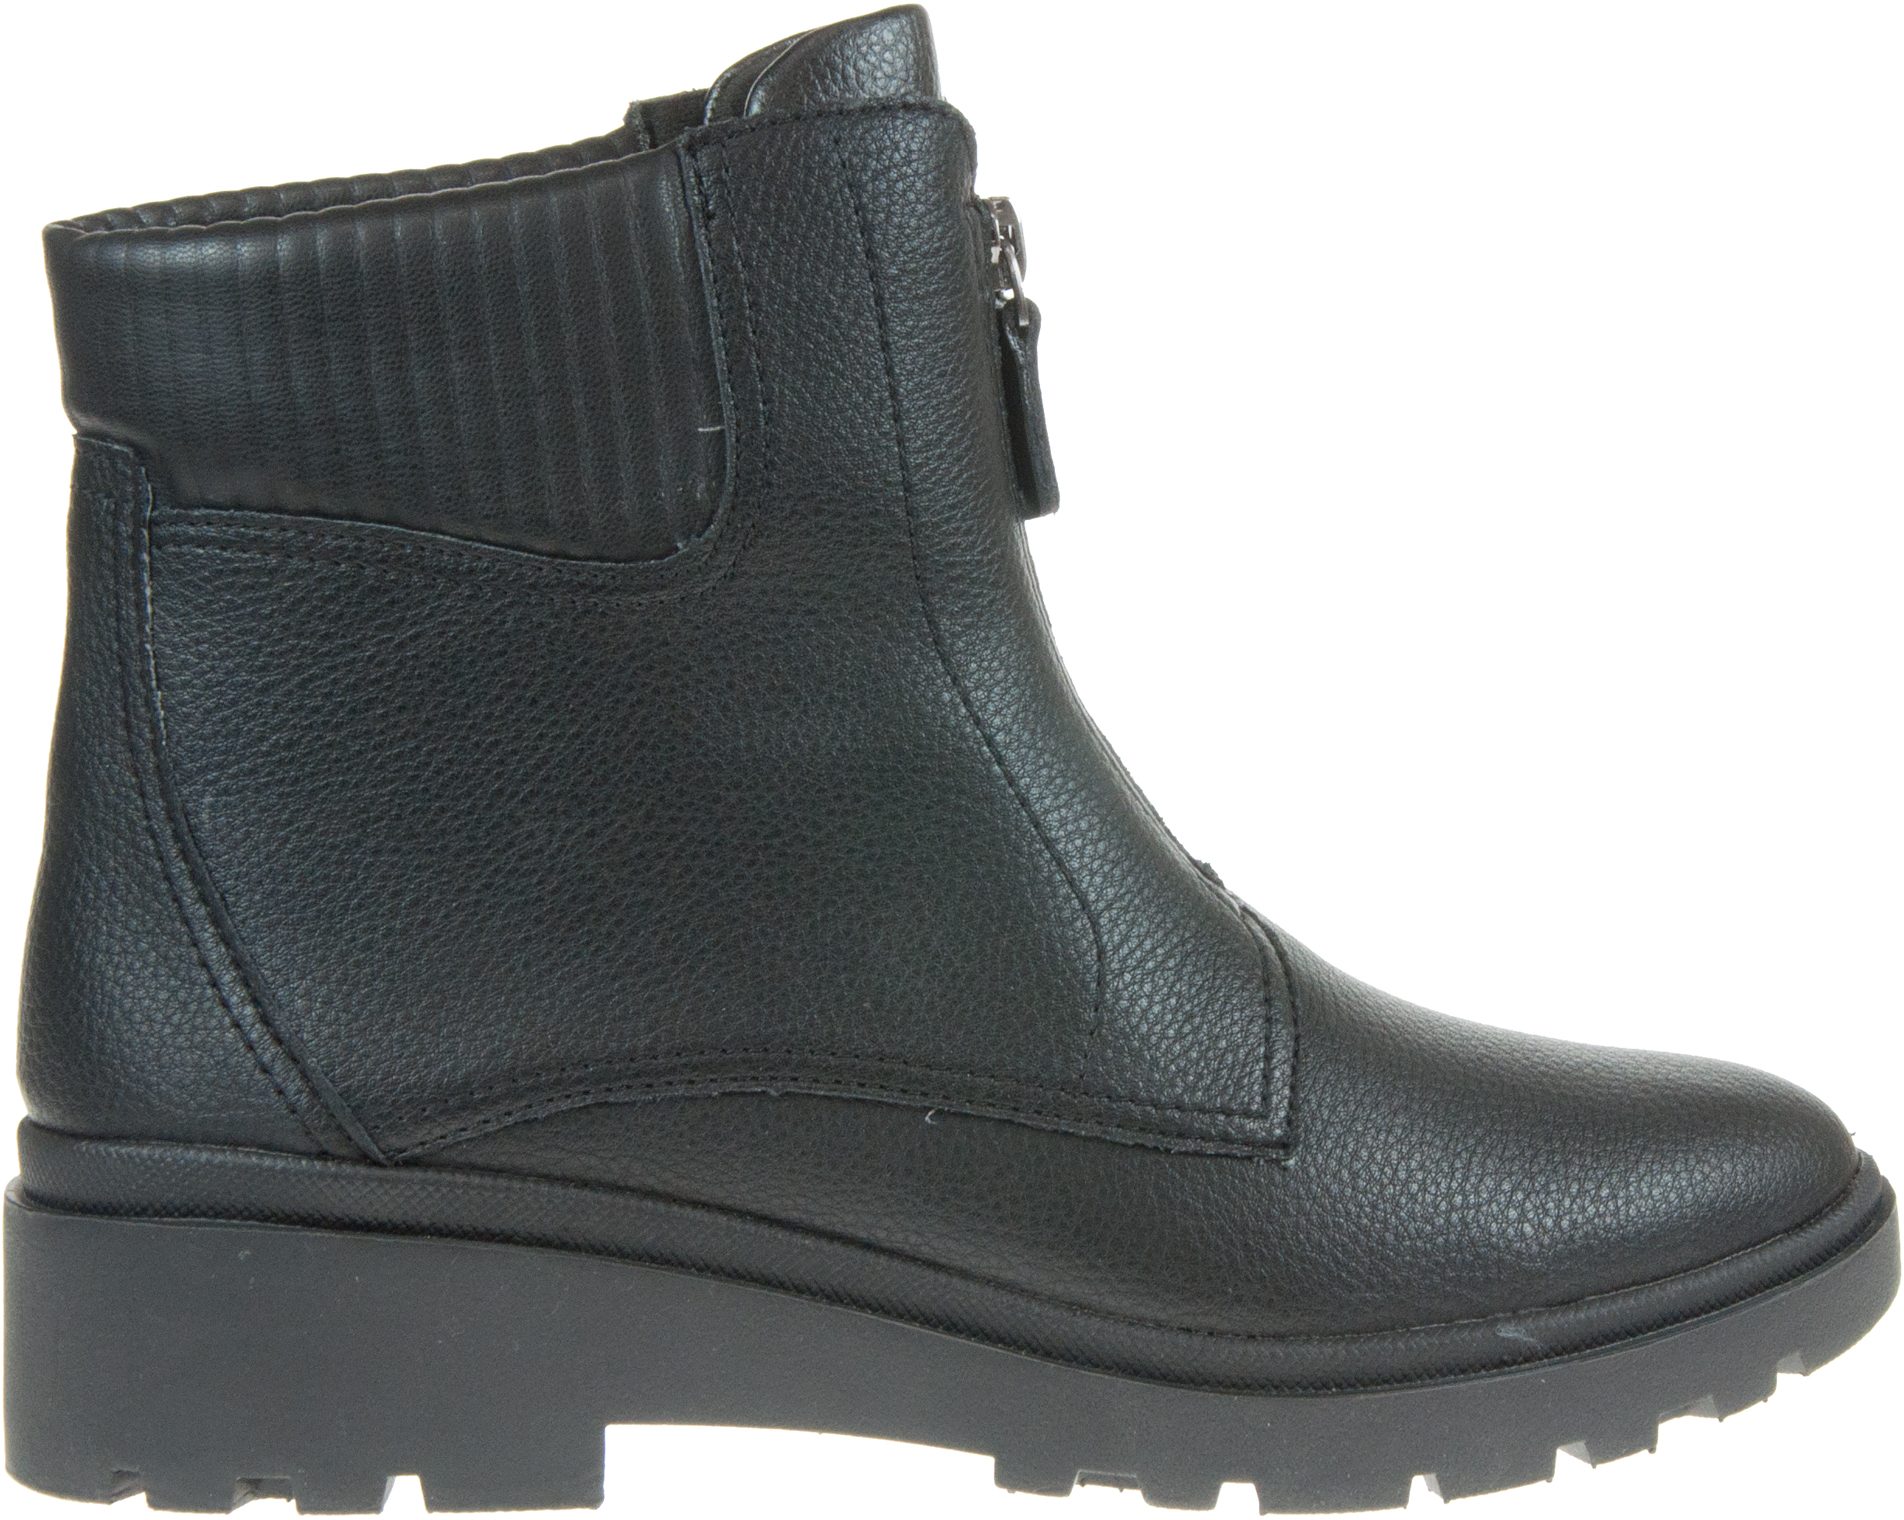 Clarks Calla Zip Black Leather 26167695 - Ankle Boots - Humphries Shoes